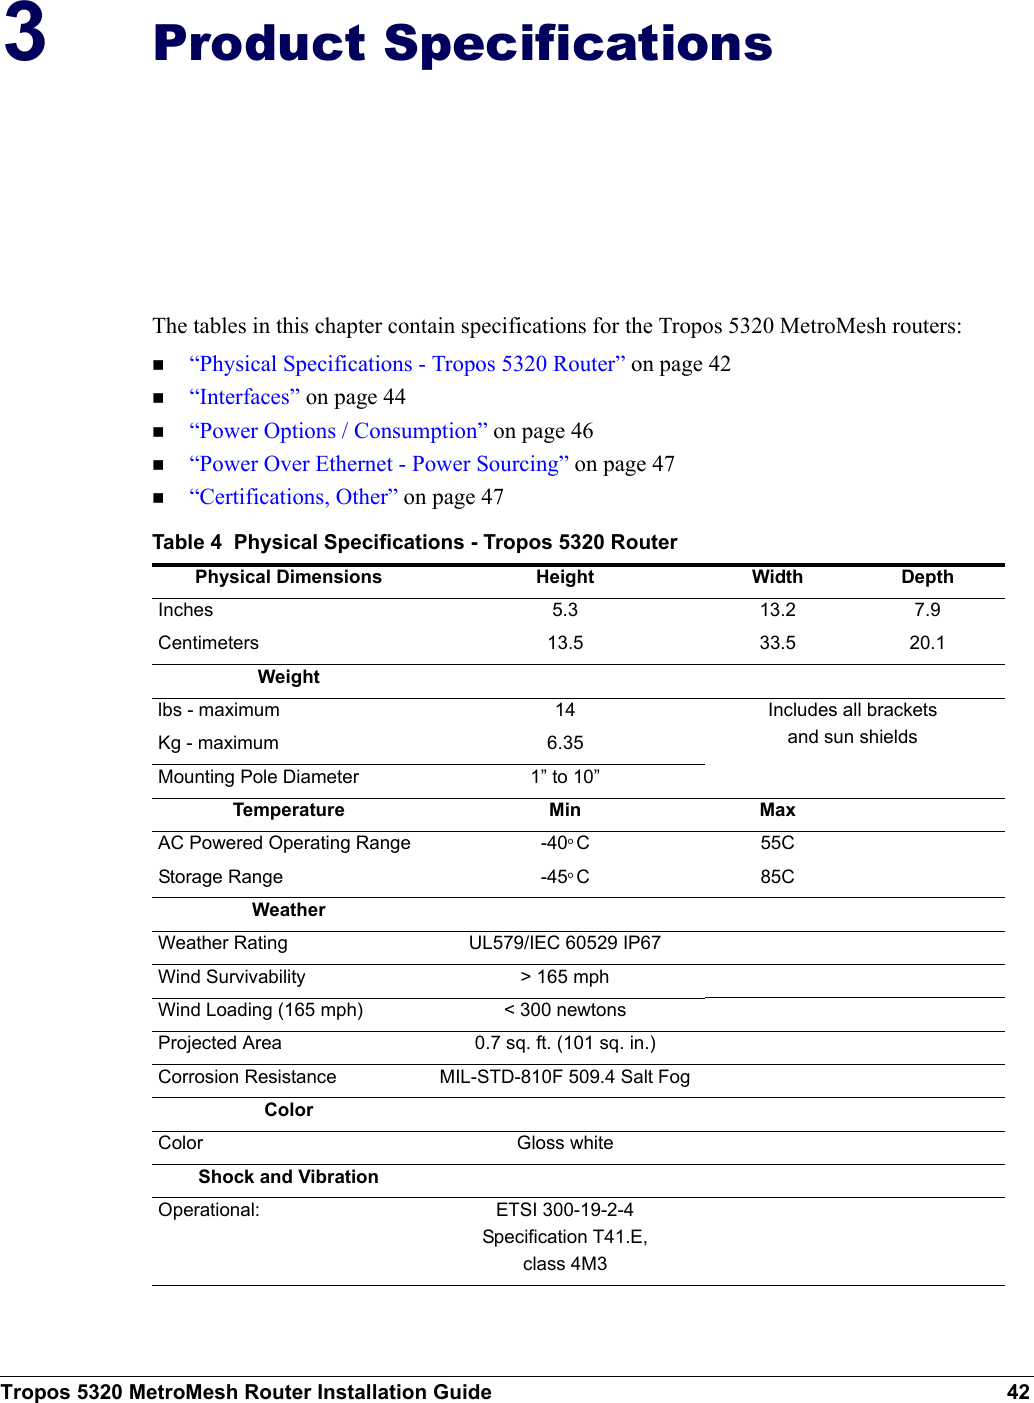 Tropos 5320 MetroMesh Router Installation Guide 423Product SpecificationsThe tables in this chapter contain specifications for the Tropos 5320 MetroMesh routers:“Physical Specifications - Tropos 5320 Router” on page 42“Interfaces” on page 44“Power Options / Consumption” on page 46“Power Over Ethernet - Power Sourcing” on page 47“Certifications, Other” on page 47Table 4  Physical Specifications - Tropos 5320 RouterPhysical Dimensions Height Width DepthInches 5.3 13.2 7.9Centimeters 13.5 33.5 20.1Weightlbs - maximum  14 Includes all brackets and sun shieldsKg - maximum 6.35Mounting Pole Diameter 1” to 10”Temperature Min MaxAC Powered Operating Range -40o C55CStorage Range -45o C85CWeatherWeather Rating UL579/IEC 60529 IP67Wind Survivability &gt; 165 mphWind Loading (165 mph) &lt; 300 newtonsProjected Area 0.7 sq. ft. (101 sq. in.)Corrosion Resistance MIL-STD-810F 509.4 Salt FogColorColor Gloss whiteShock and VibrationOperational: ETSI 300-19-2-4Specification T41.E,class 4M3